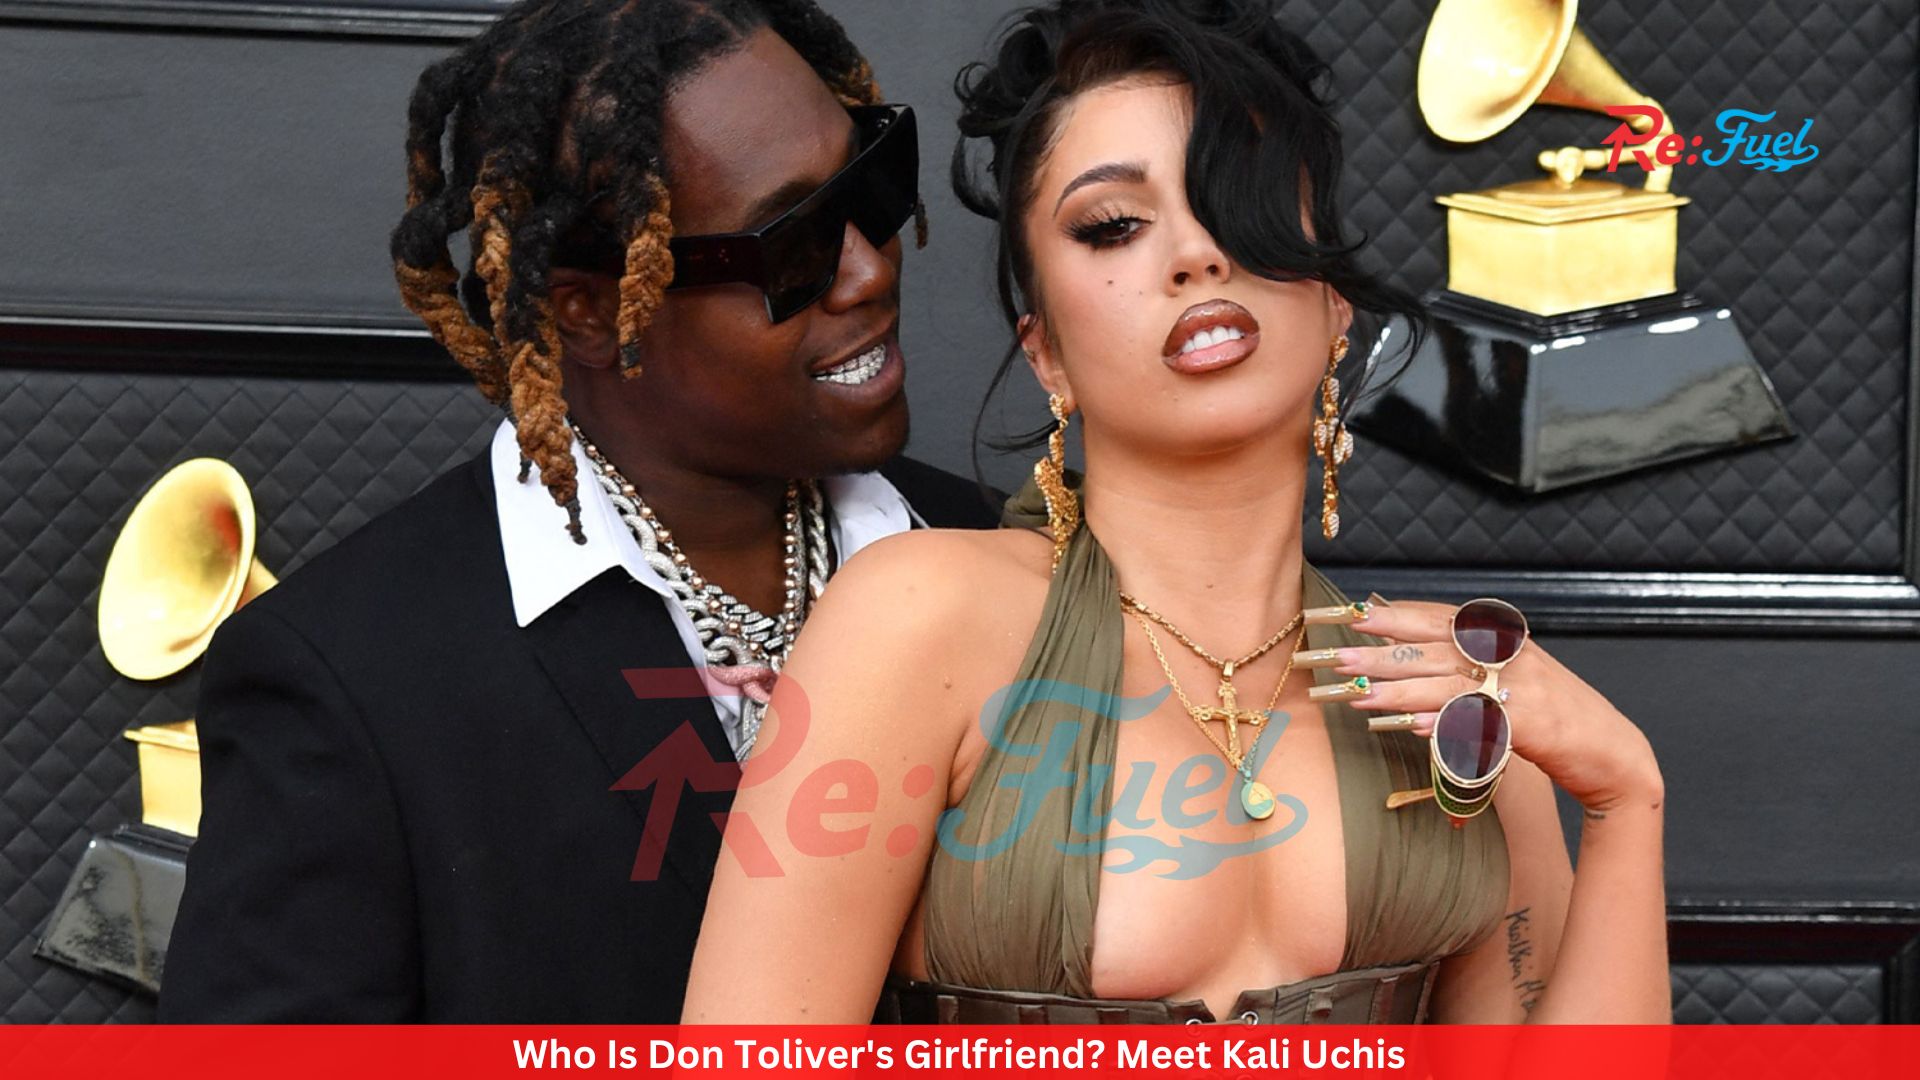 Who Is Don Toliver's Girlfriend? Meet Kali Uchis